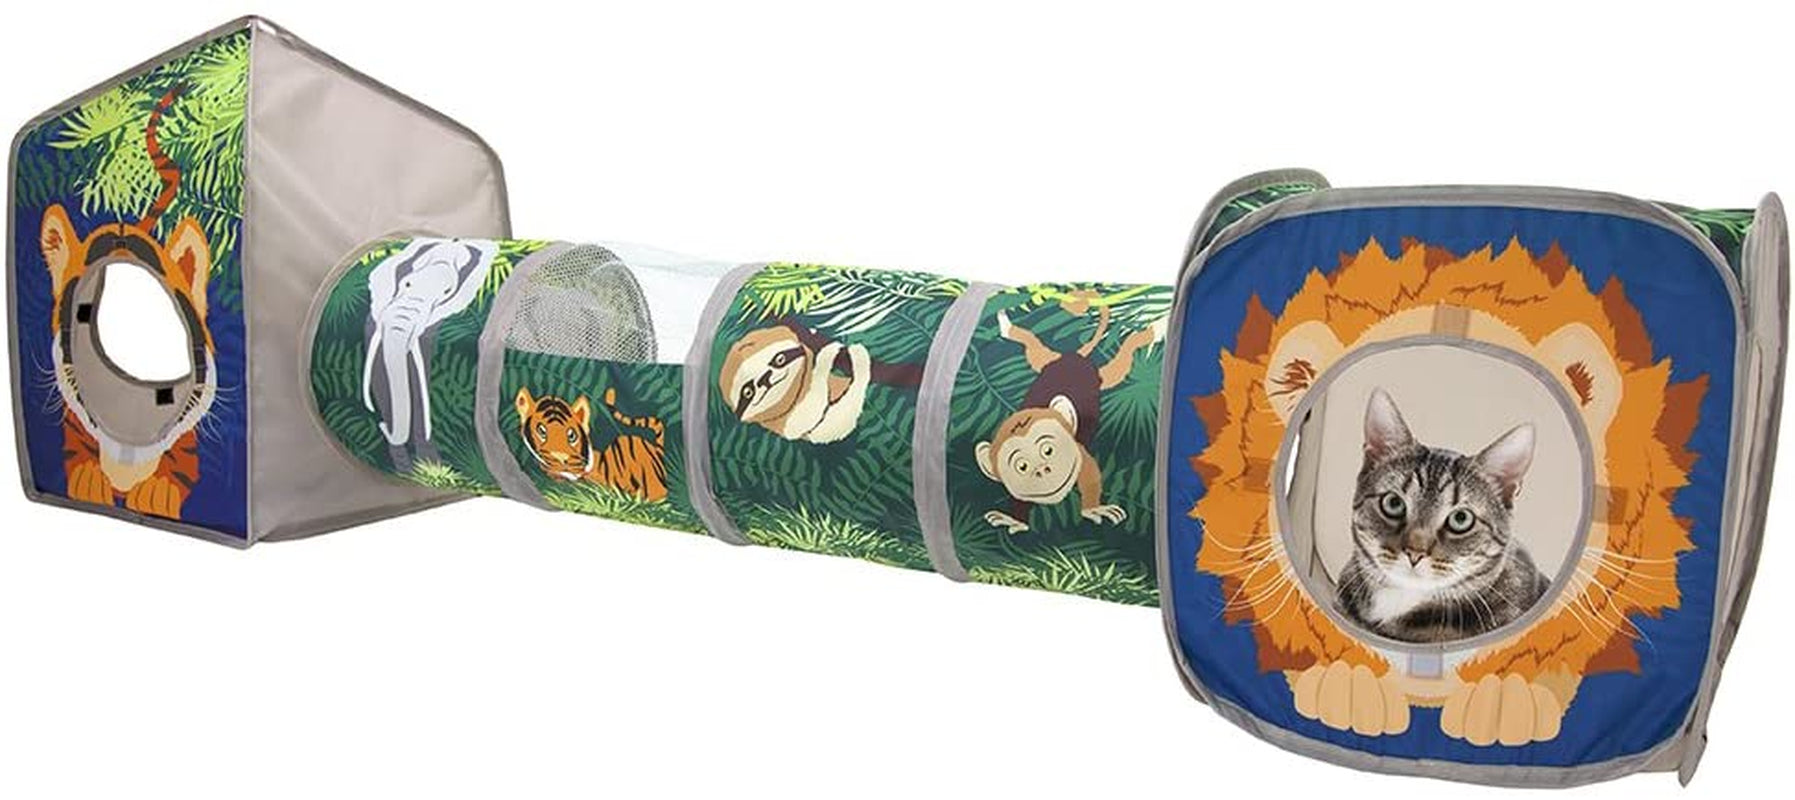 Kitty City Pop Open Jungle Combo,Collapsible Cat Cube, Play Kennel, Cat Bed, Tunnel, Cat Toys